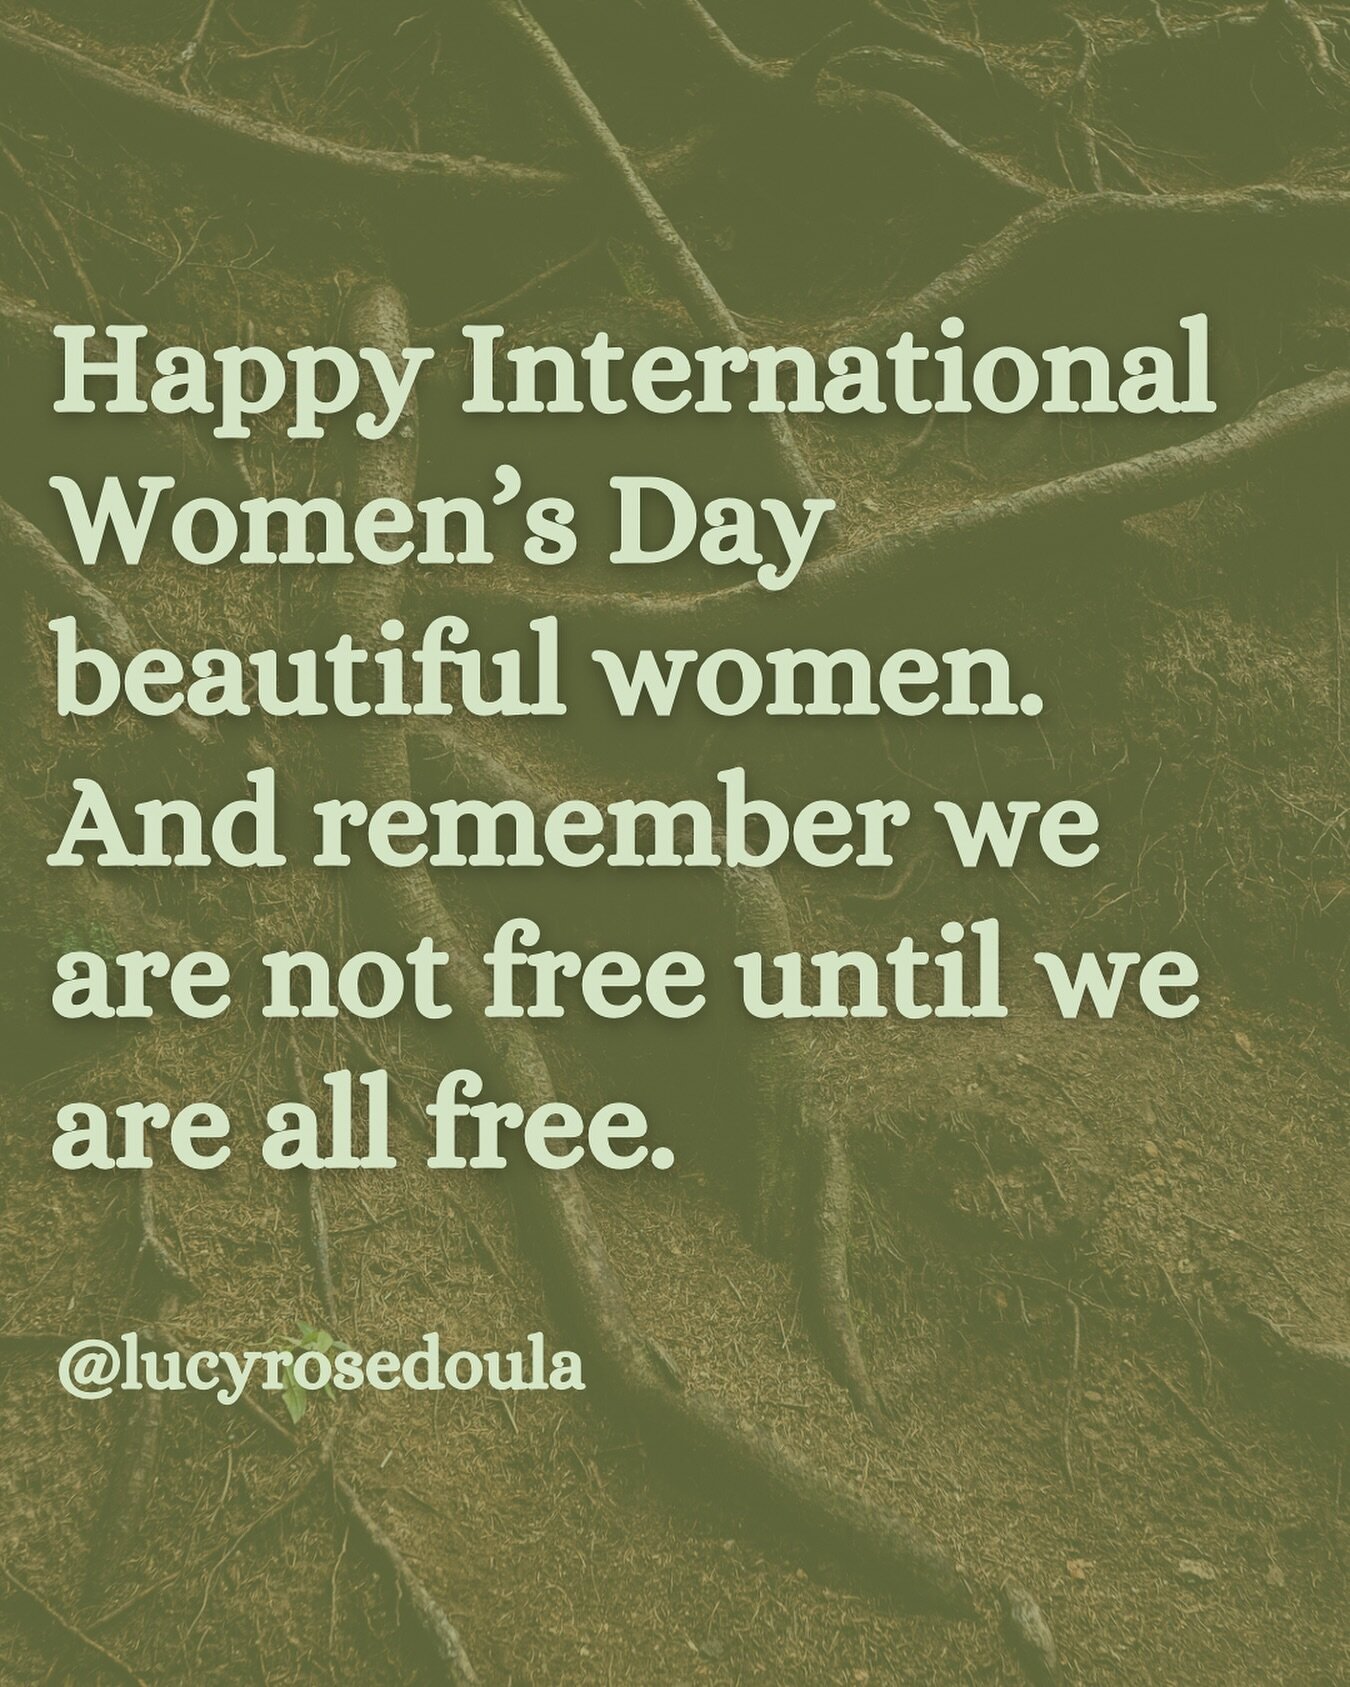 It seems wrong to celebrate International Women&rsquo;s Day without talking about the horrors so many women are facing right now. Without acknowledging that even though we all have a long way to go, some of us hold significantly more privilege, equal